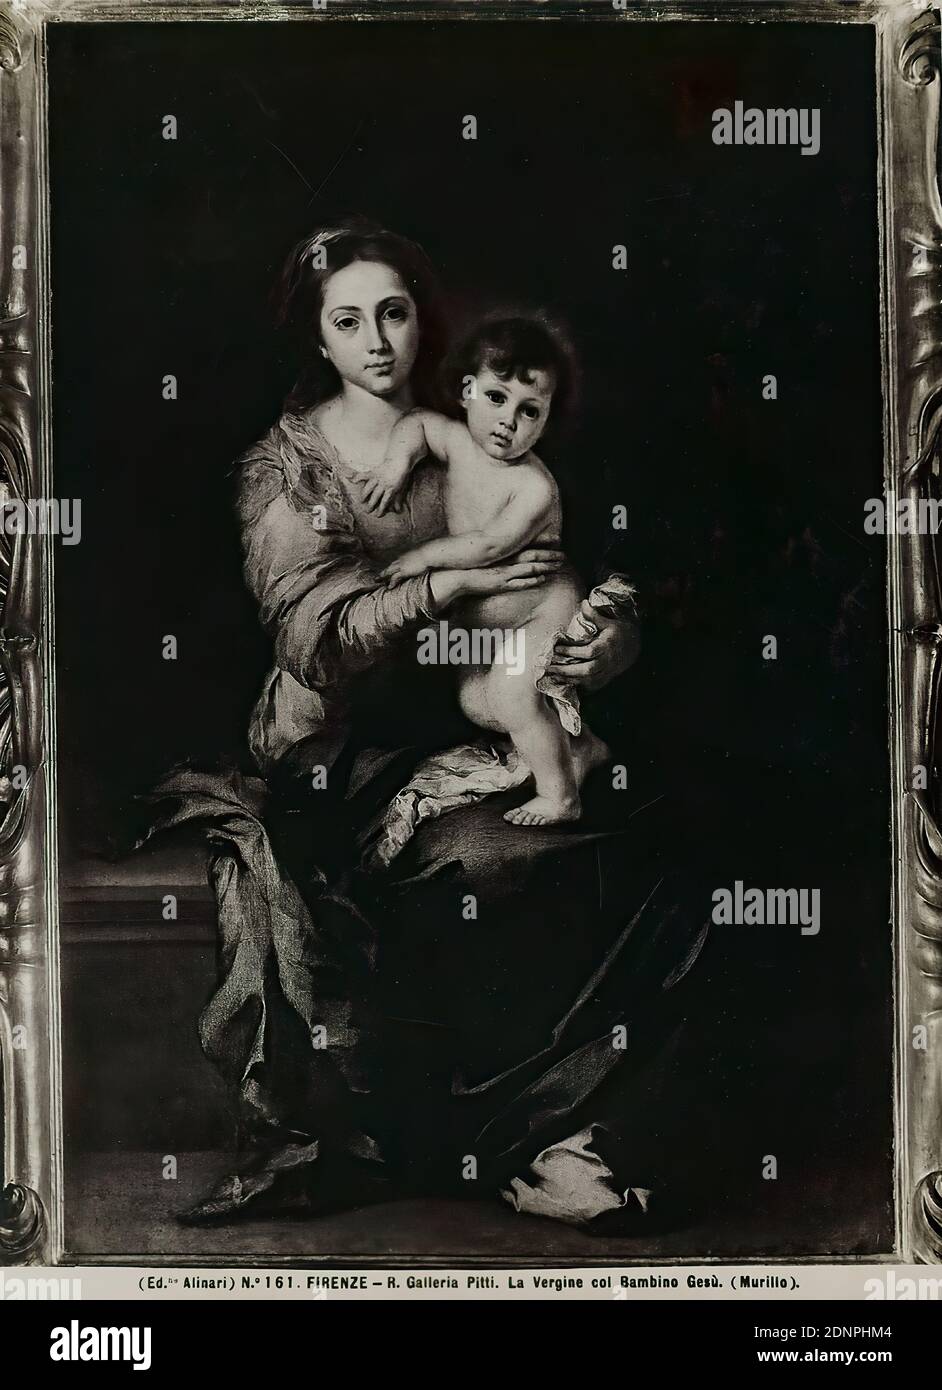 No. 161 Firenze - R. Galleria Pitti. La Vergine col Bambino Gesù. (Murillo), silver gelatin paper, black and white positive process, image size: height: 25.00 cm; width: 19.00 cm, inscribed: recto and center: exposed: No. 161. FIRENZE - R. Galleria Pitti. La Vergine col Bambino Gesù. (Murillo), stamp: verso on the print: L. 3.50, two stamps, Mary with Christ Child (Madonna Stock Photo